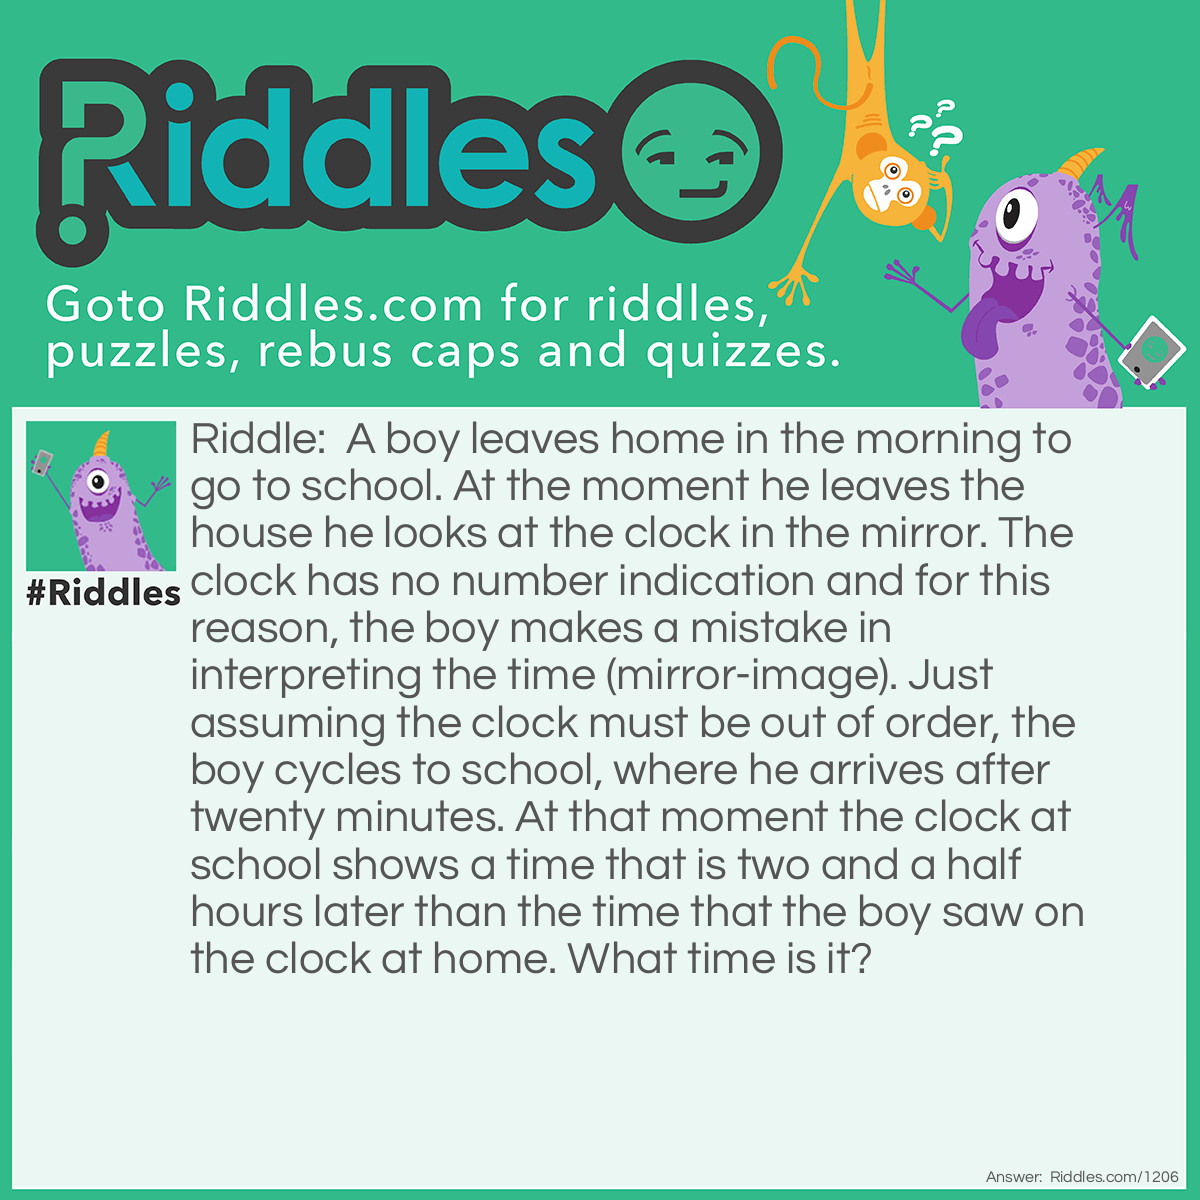 Riddle: A boy leaves home in the morning to go to school. At the moment he leaves the house he looks at the clock in the mirror. The clock has no number indication and for this reason, the boy makes a mistake in interpreting the time (mirror-image). Just assuming the clock must be out of order, the boy cycles to school, where he arrives after twenty minutes. At that moment the clock at school shows a time that is two and a half hours later than the time that the boy saw on the clock at home. What time is it? Answer: The difference between the real time and the time of the mirror image is two hours and ten minutes (two and a half hours, minus the twenty minutes of cycling). Therefore, the original time on the clock at home that morning could only have been five minutes past seven: The difference between these clocks is exactly 2 hours and ten minutes (note that also five minutes past one can be mirrored in a similar way, but this is not in the morning!). Conclusion: The boy reaches school at five minutes past seven plus twenty minutes of cycling, which is twenty-five minutes past seven!...